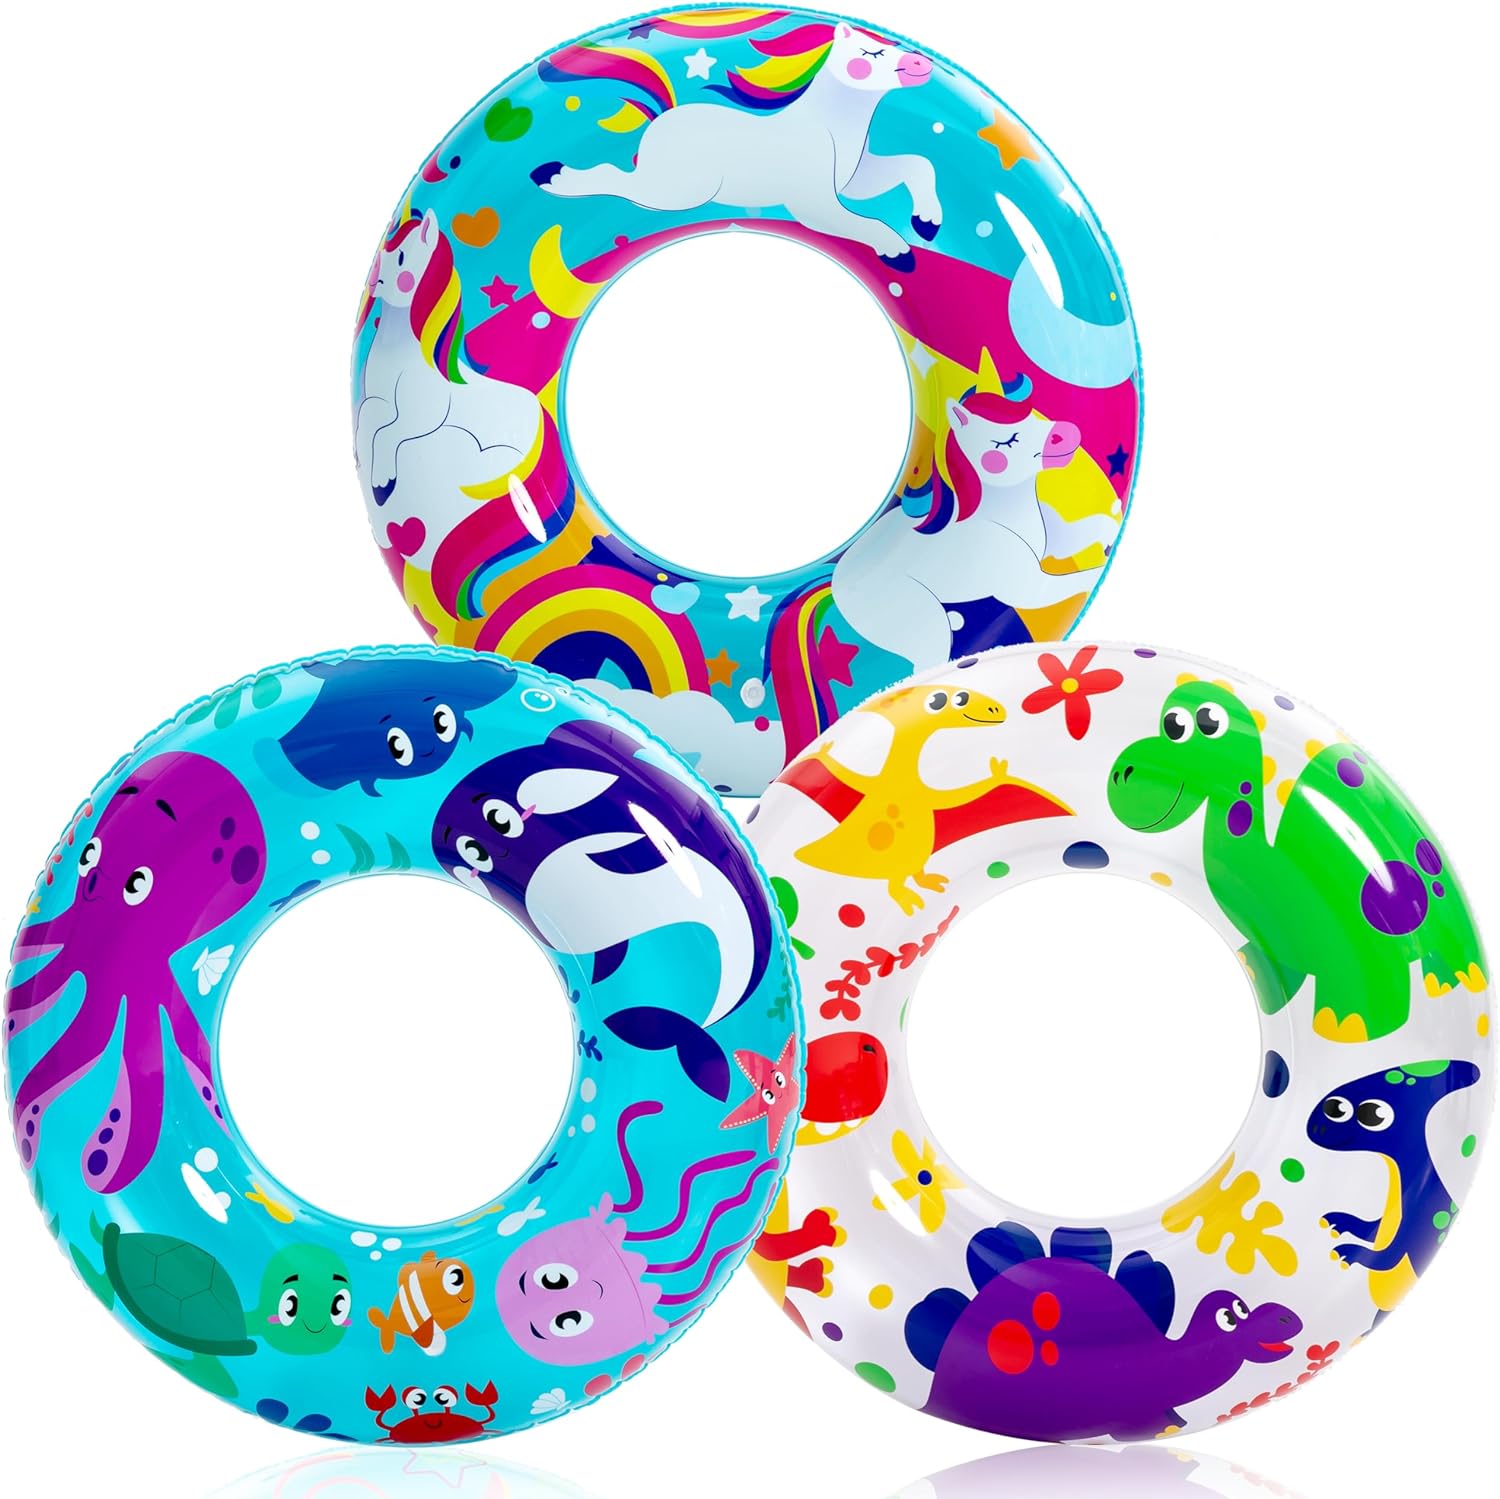 JOYIN 3 Pack Pool Floats, Pool Tube for Kids Swim Rings Inflatable Tubes, Unicorn Sea Animal Tubes Floatie Ring Water Toys for Swimming Pool, Summer Beach Party